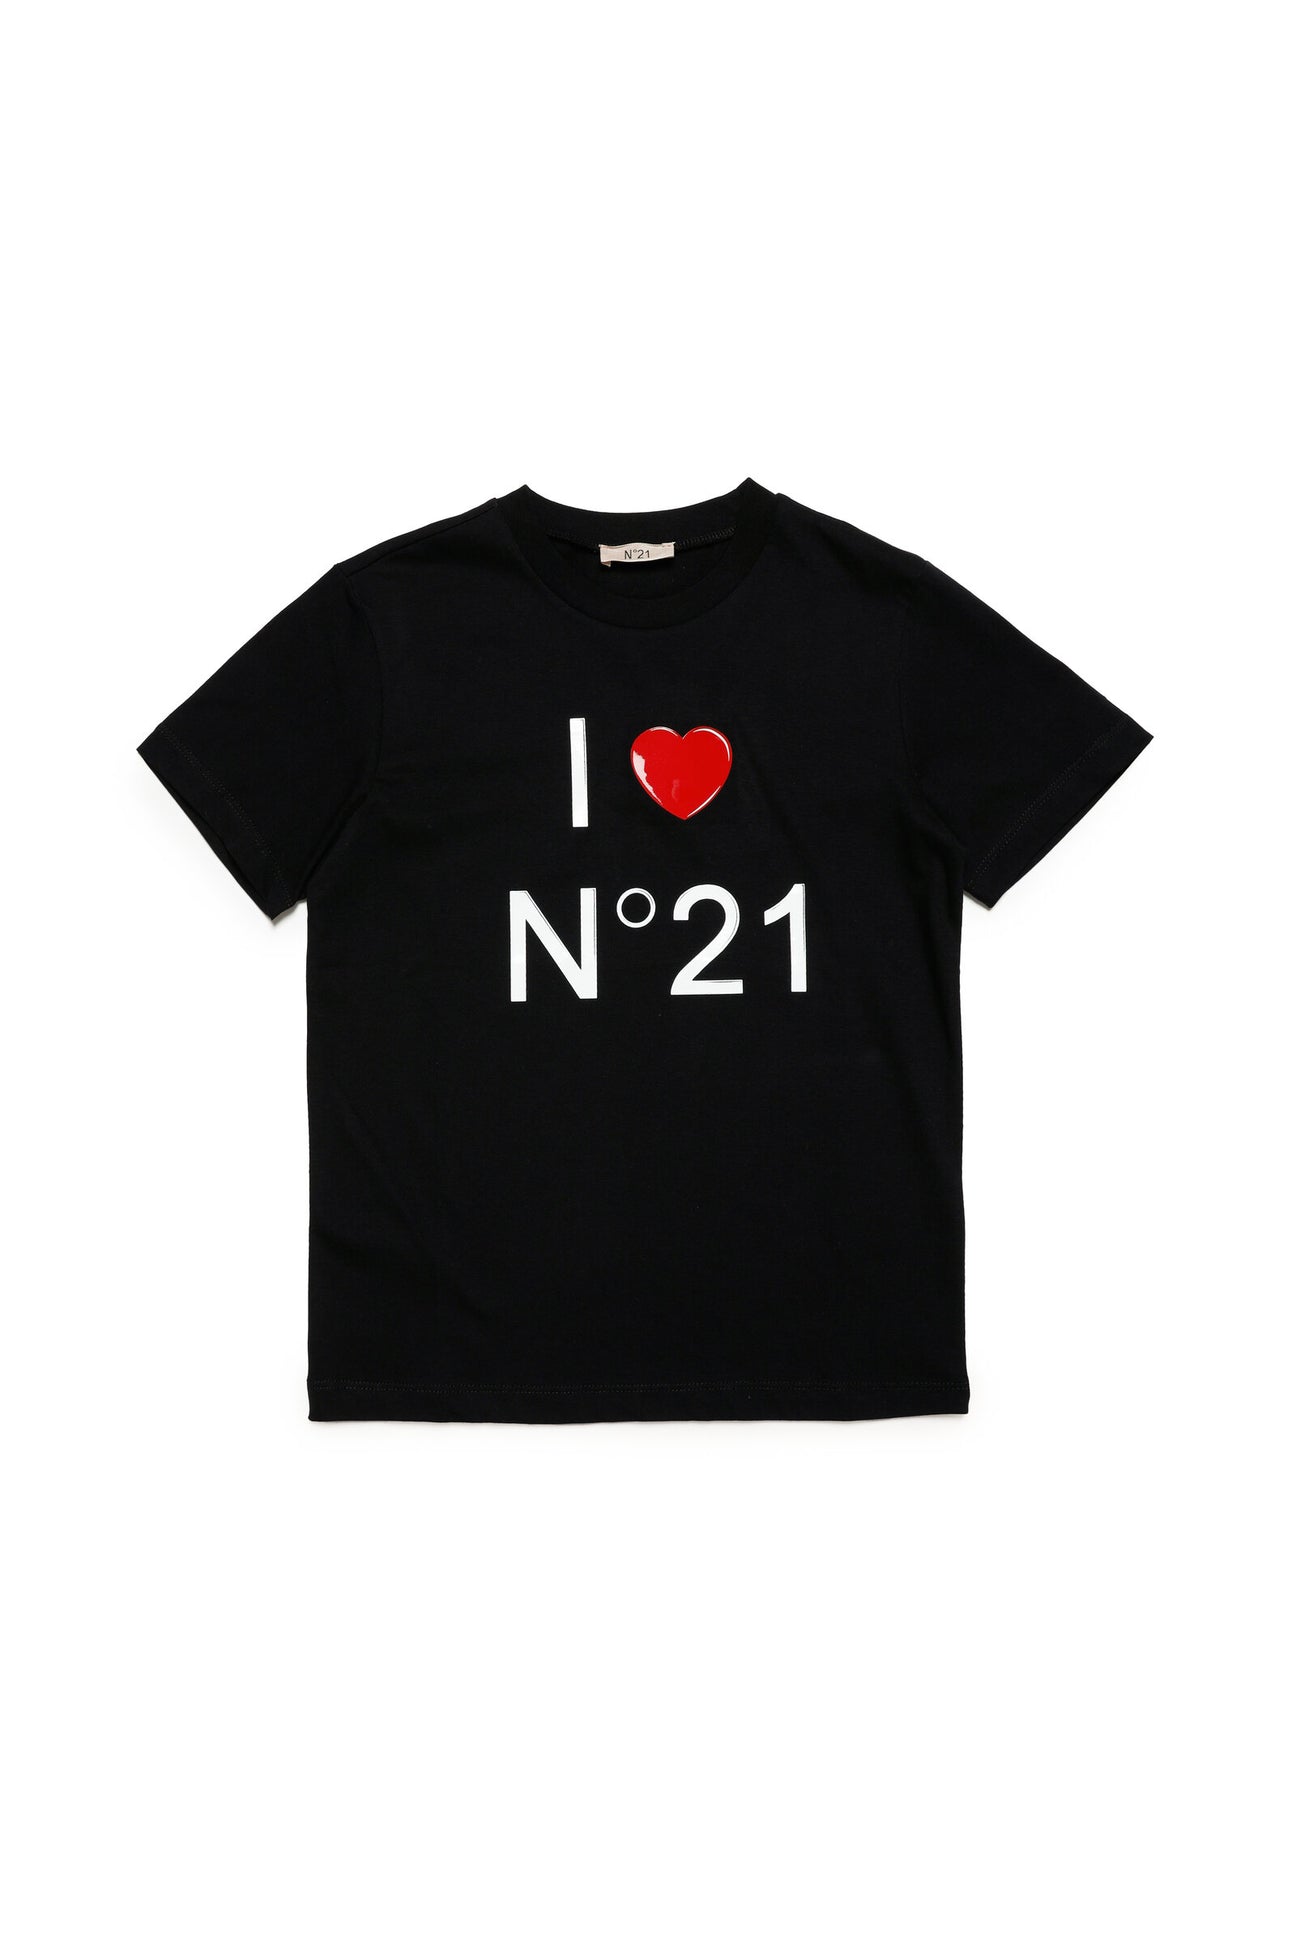 Sale N°21 Clothing, Shoes and Accessories for Kids and Teens